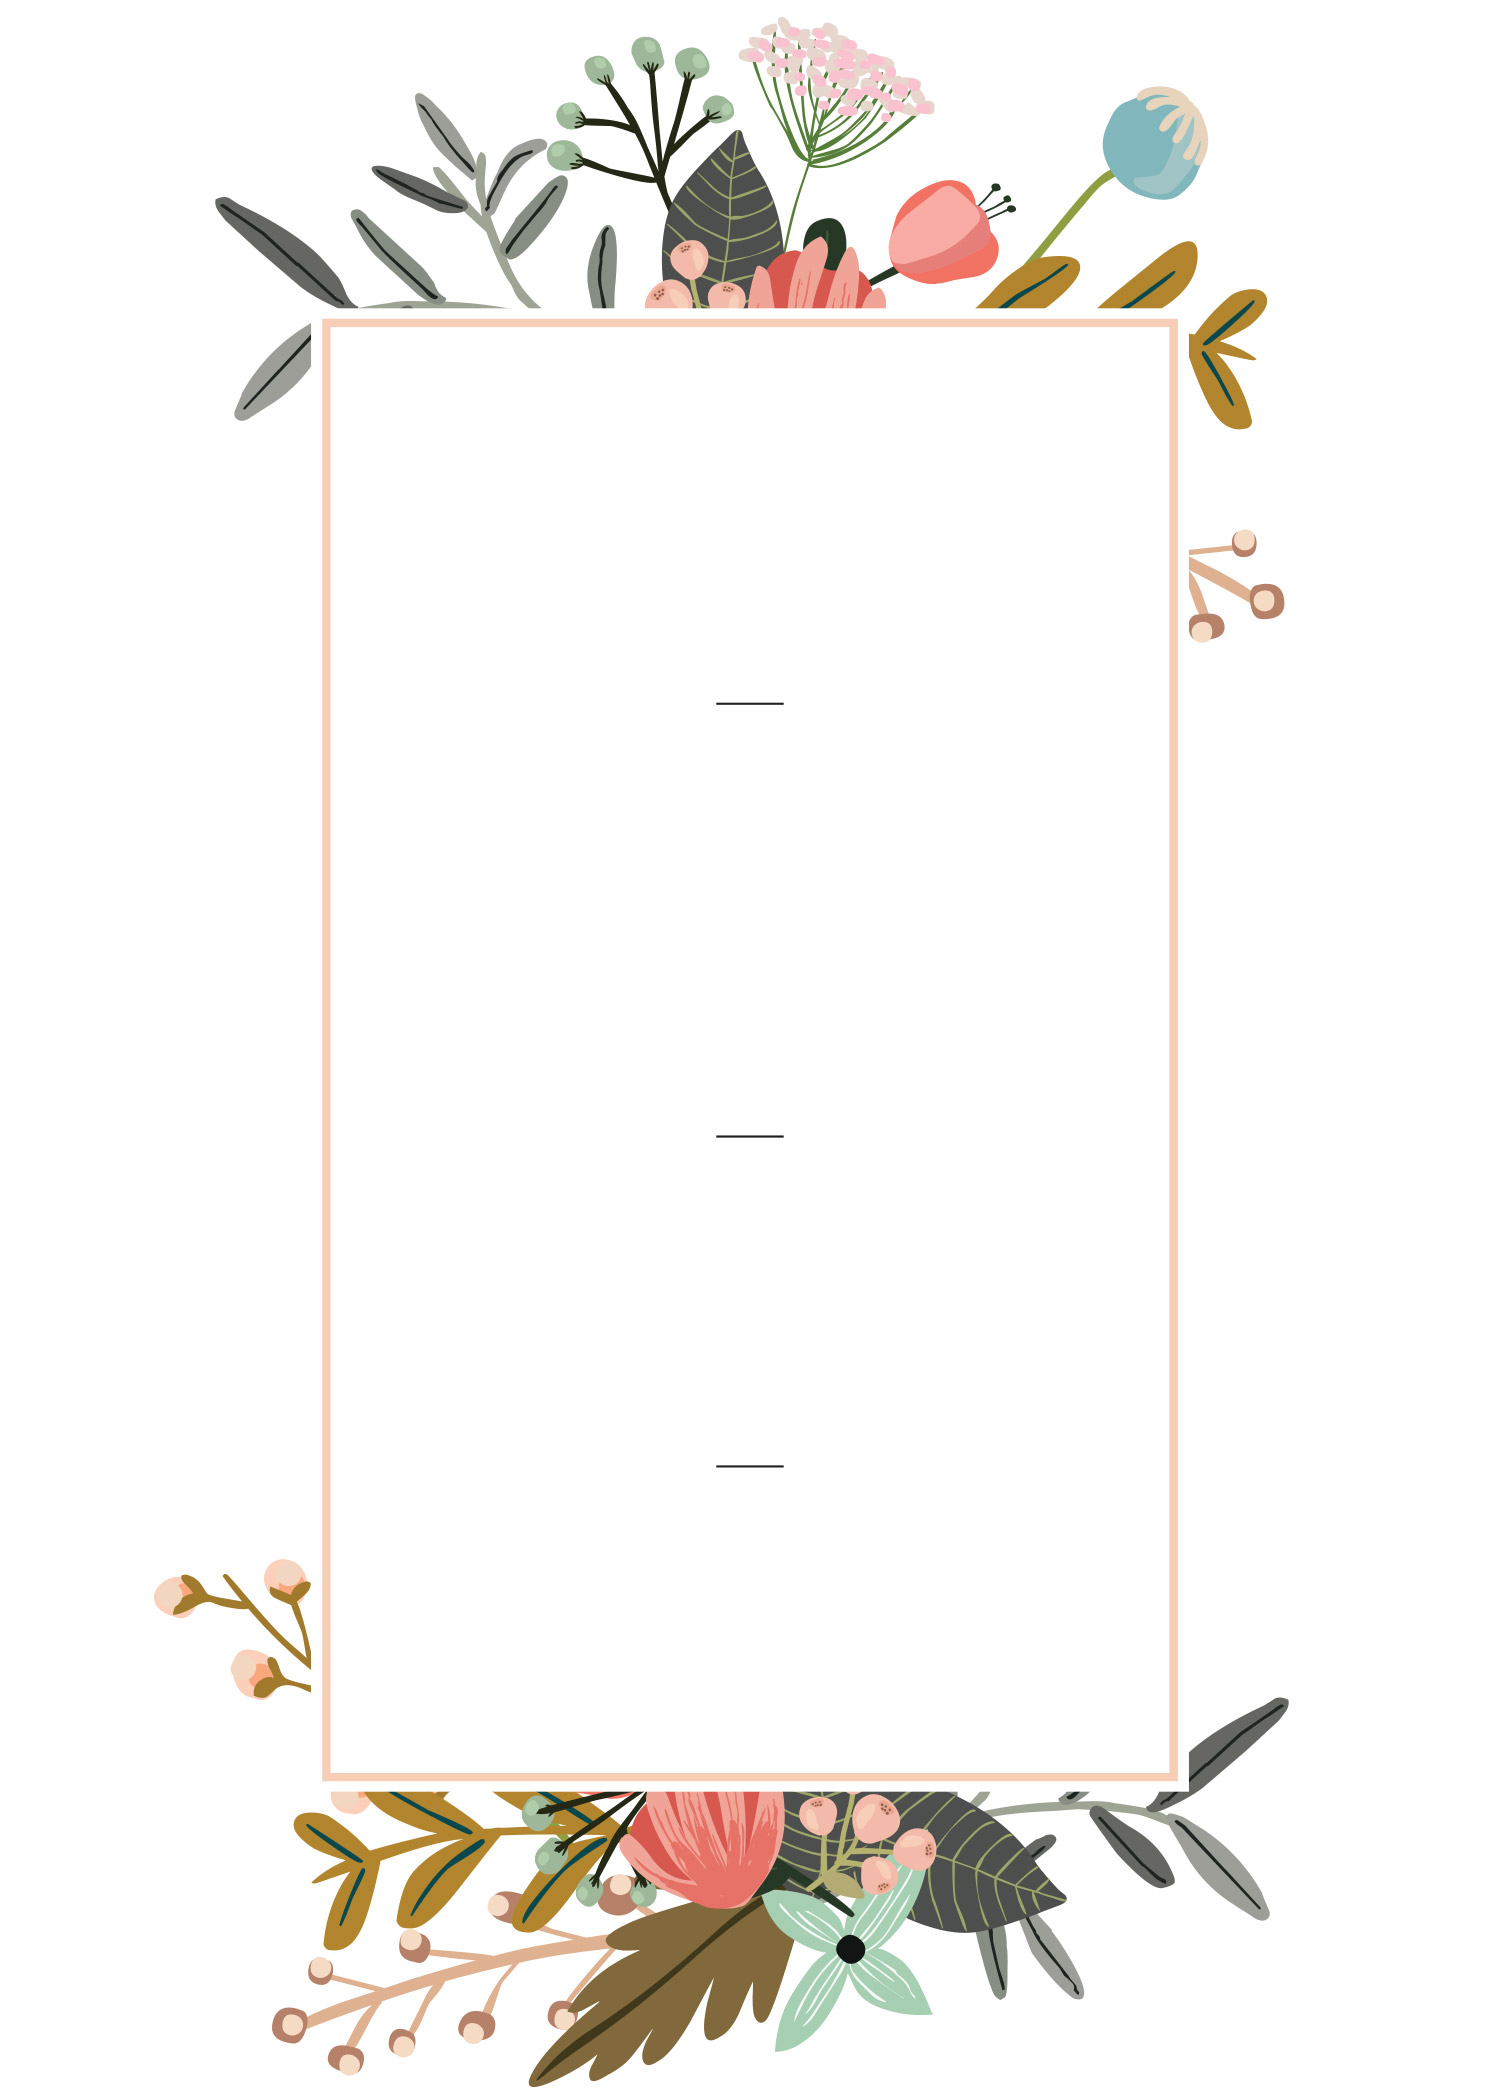 Editable Wedding Invitation Templates For The Perfect Card Shutterfly with dimensions 1500 X 2100